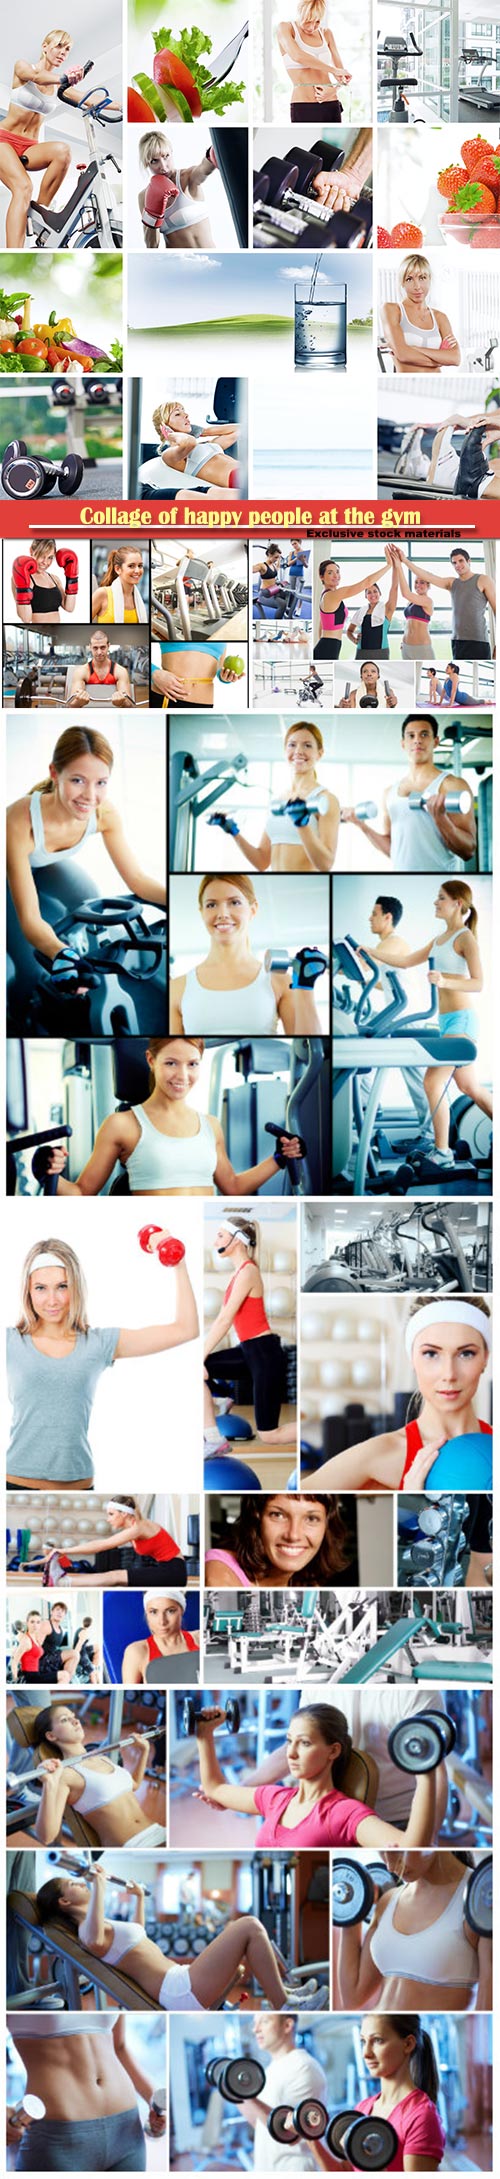 Collage of happy people at the gym working out